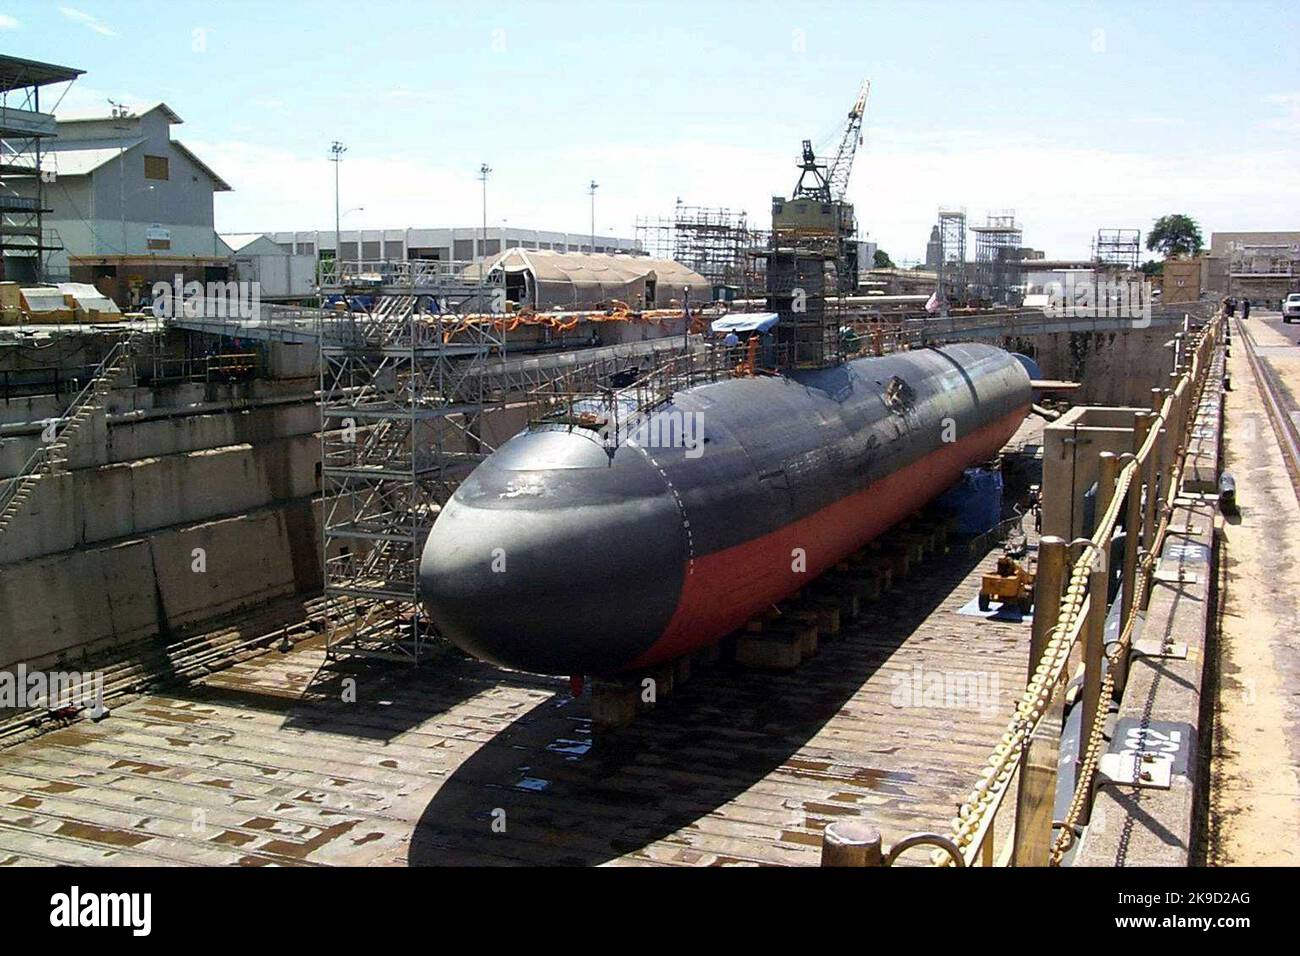 The USS Greeneville (SSN 772) sits in Dry Dock at the Pearl Harbor Naval Shipyard Hawaii, on Feb. 21, 2001. USS Greeneville is a Los Angeles-class nuclear-powered attack submarine (SSN), Stock Photo